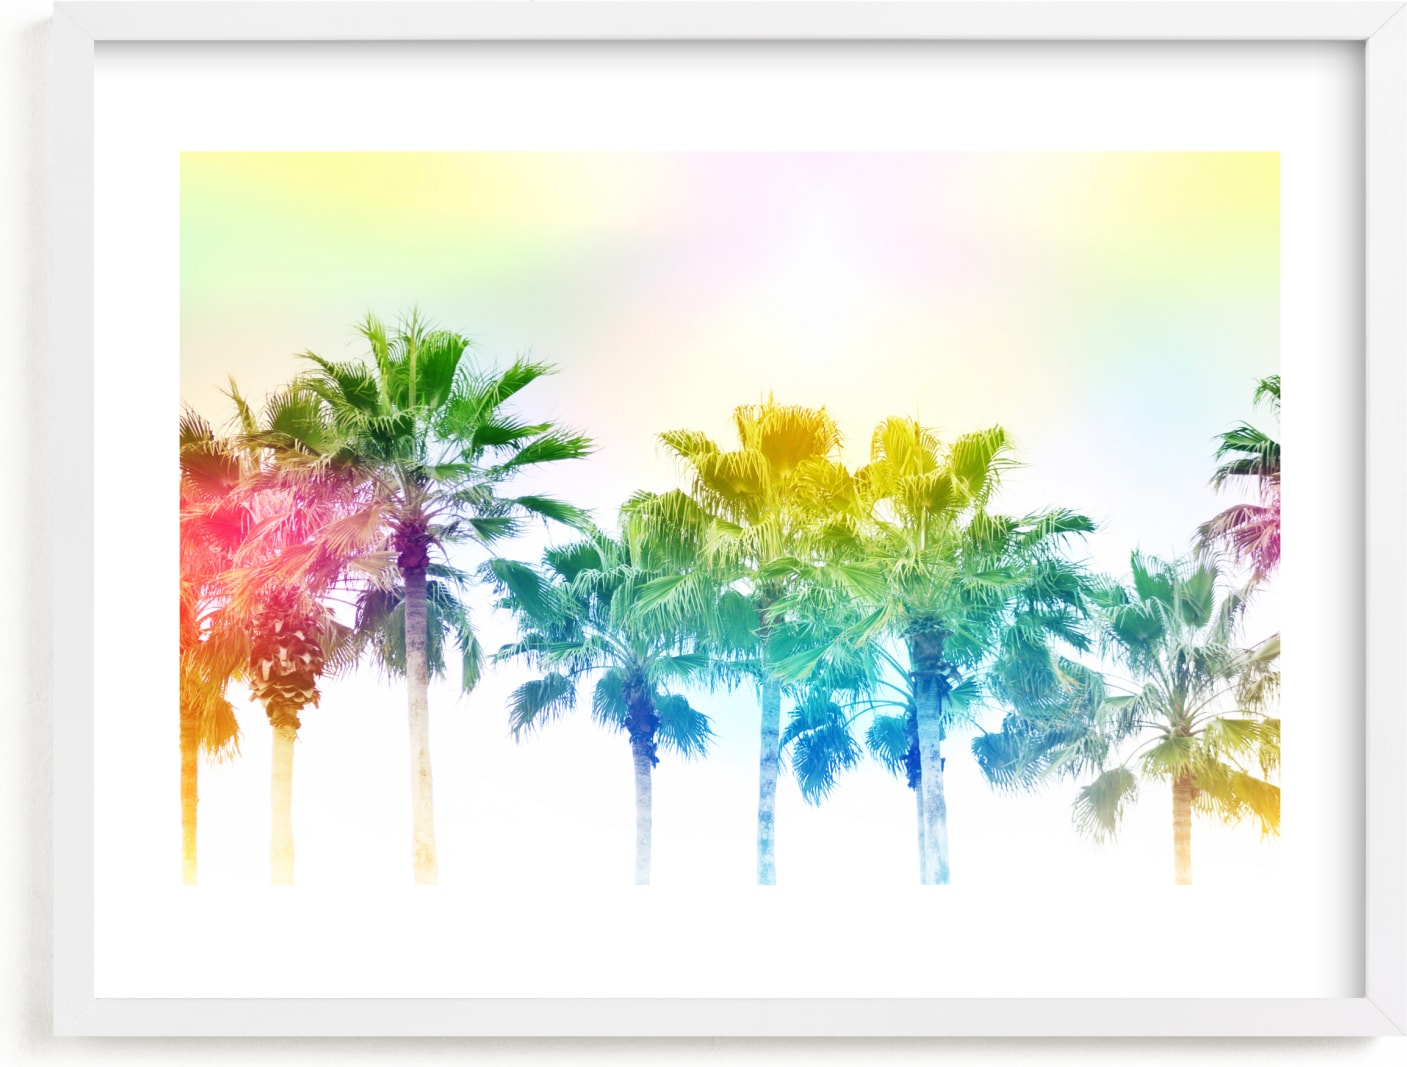 This is a colorful art by Dawn Smith called Rainbow palms.